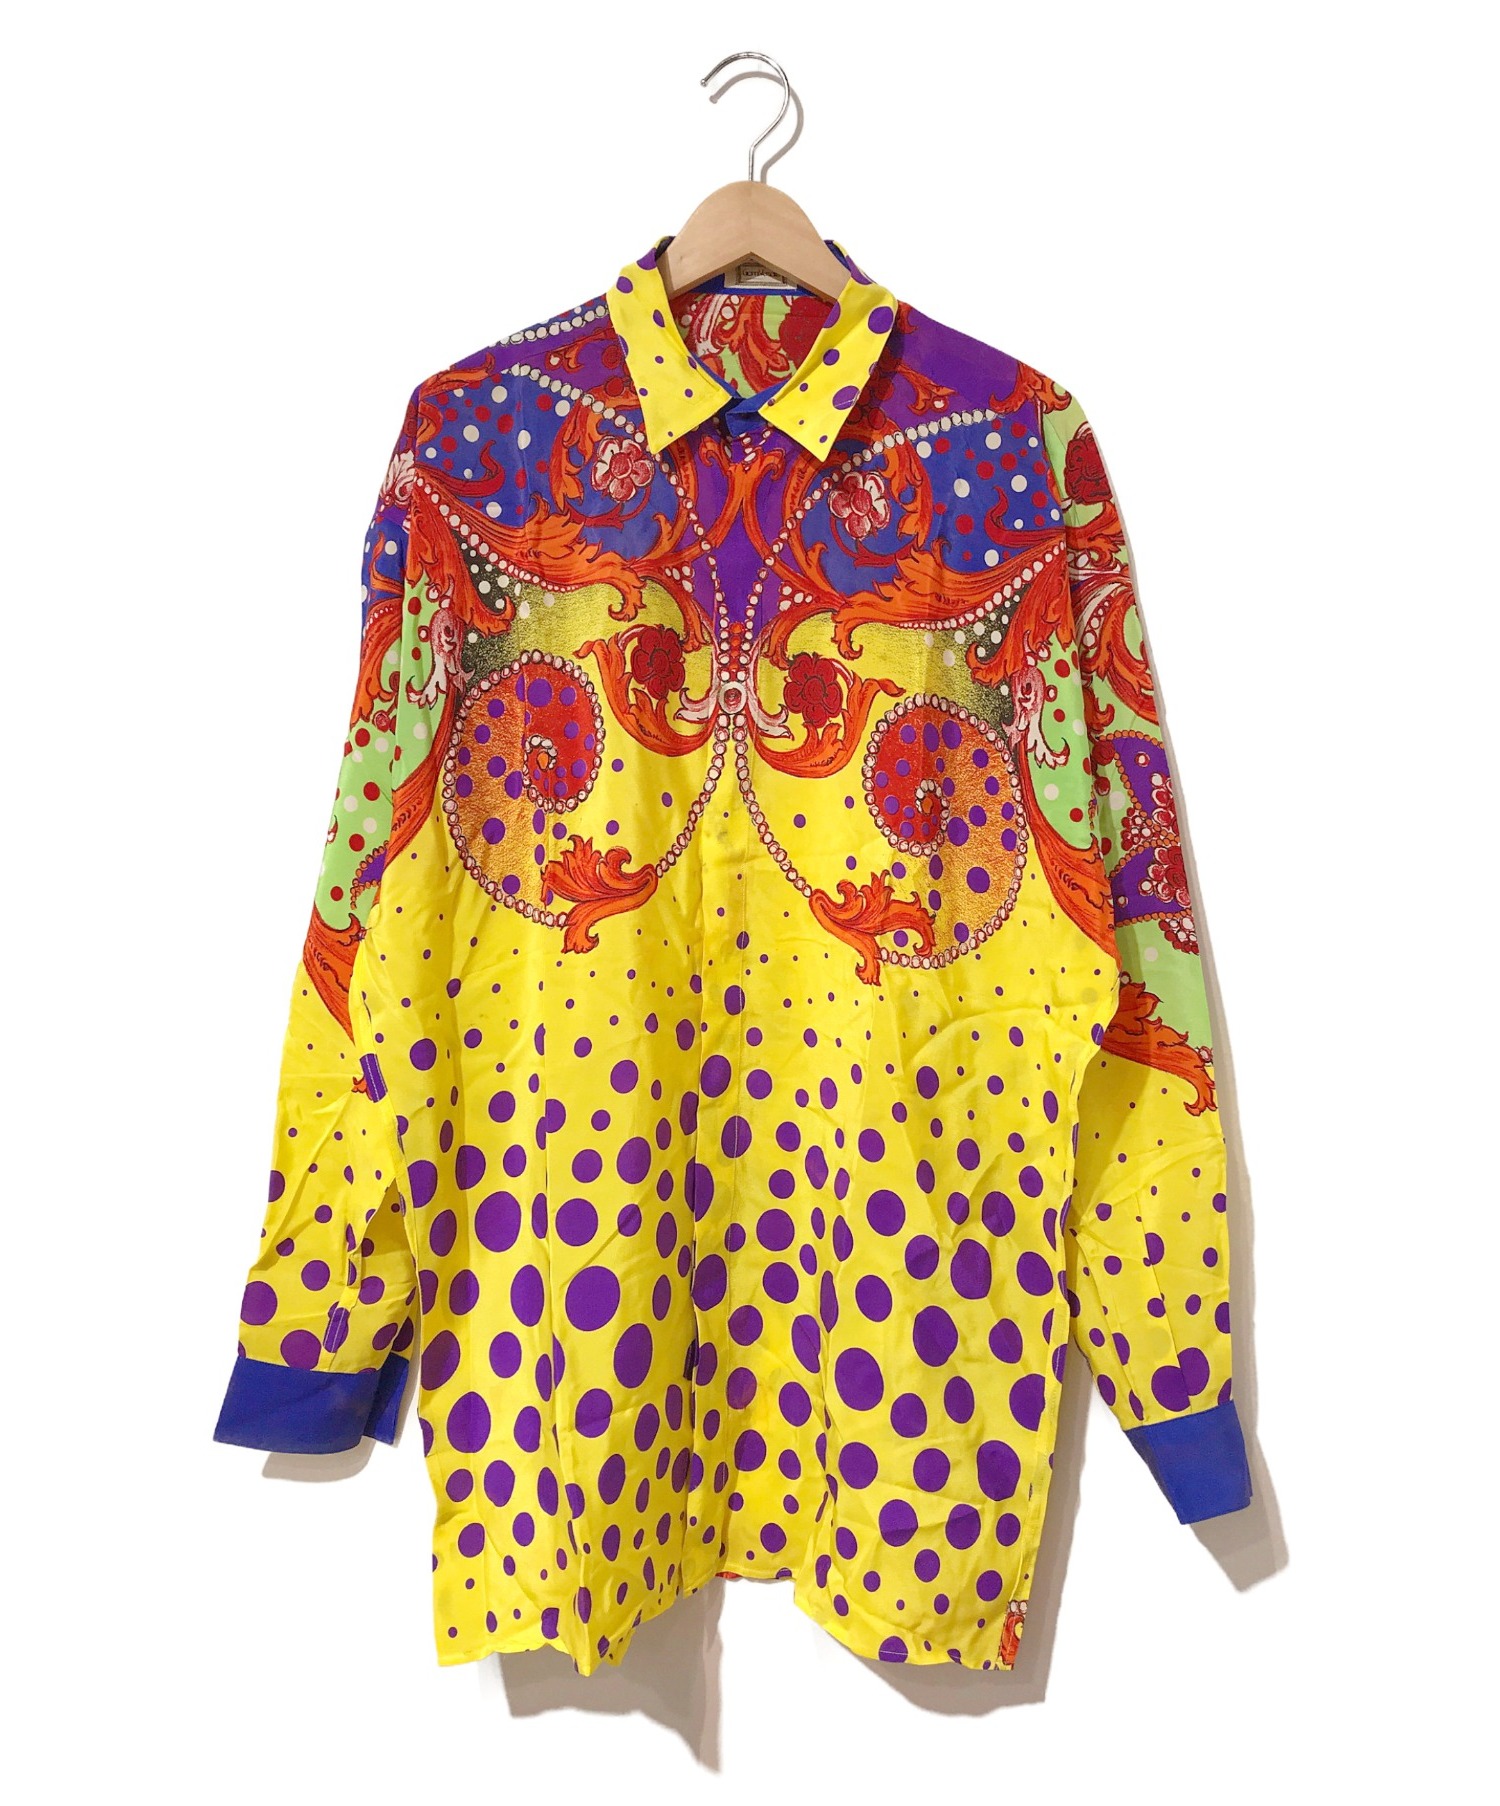 GIANNI VERSACE FLORAL COTTON SHIRT アーカイブ